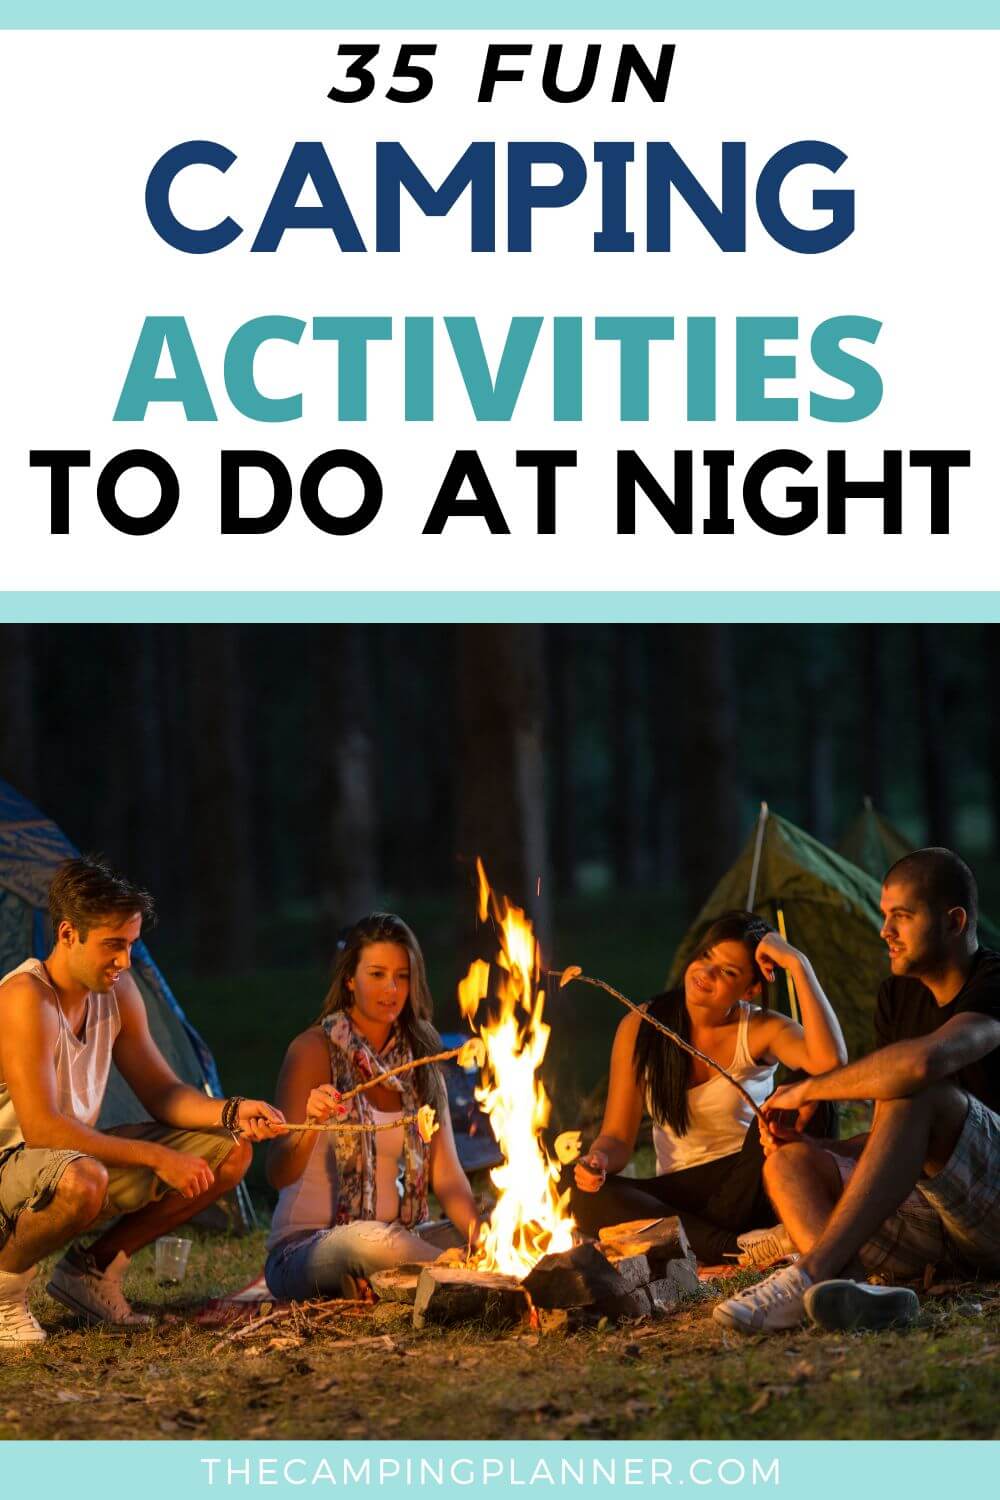 35 fun camping activities to do at night with group of people sitting around campfire at night.